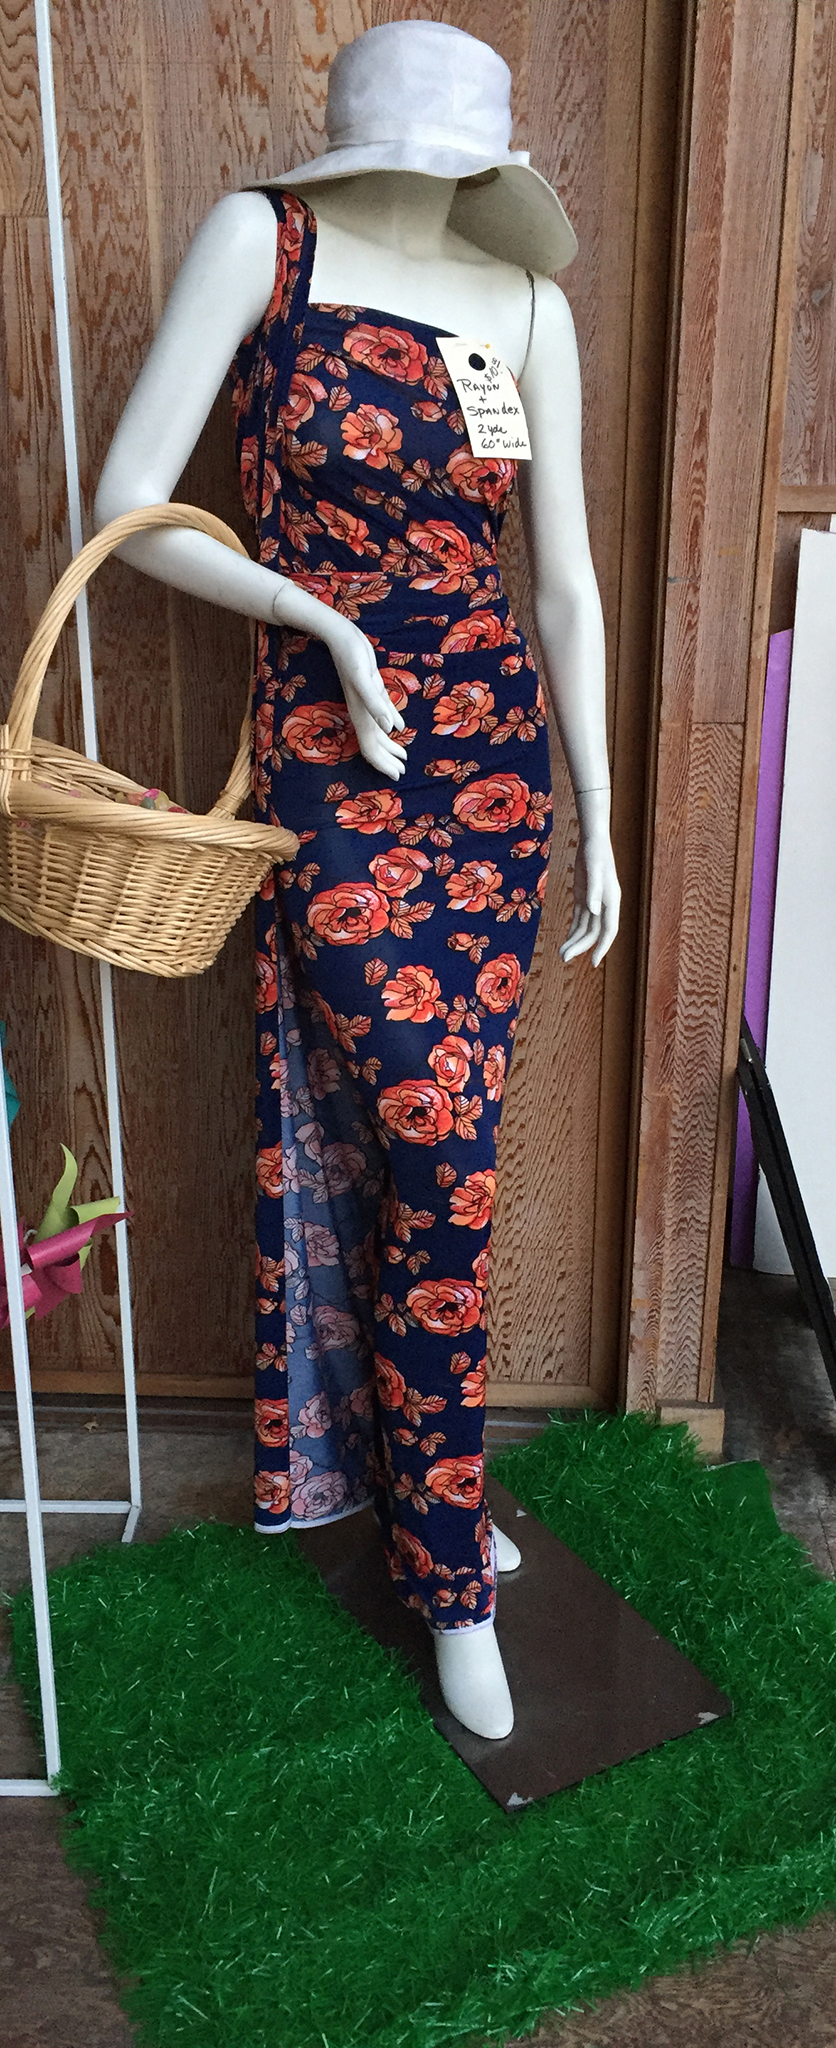 Floral rayon knit fabric draped over a store mannequin with a basket hanging from right arm and a white summer hat.